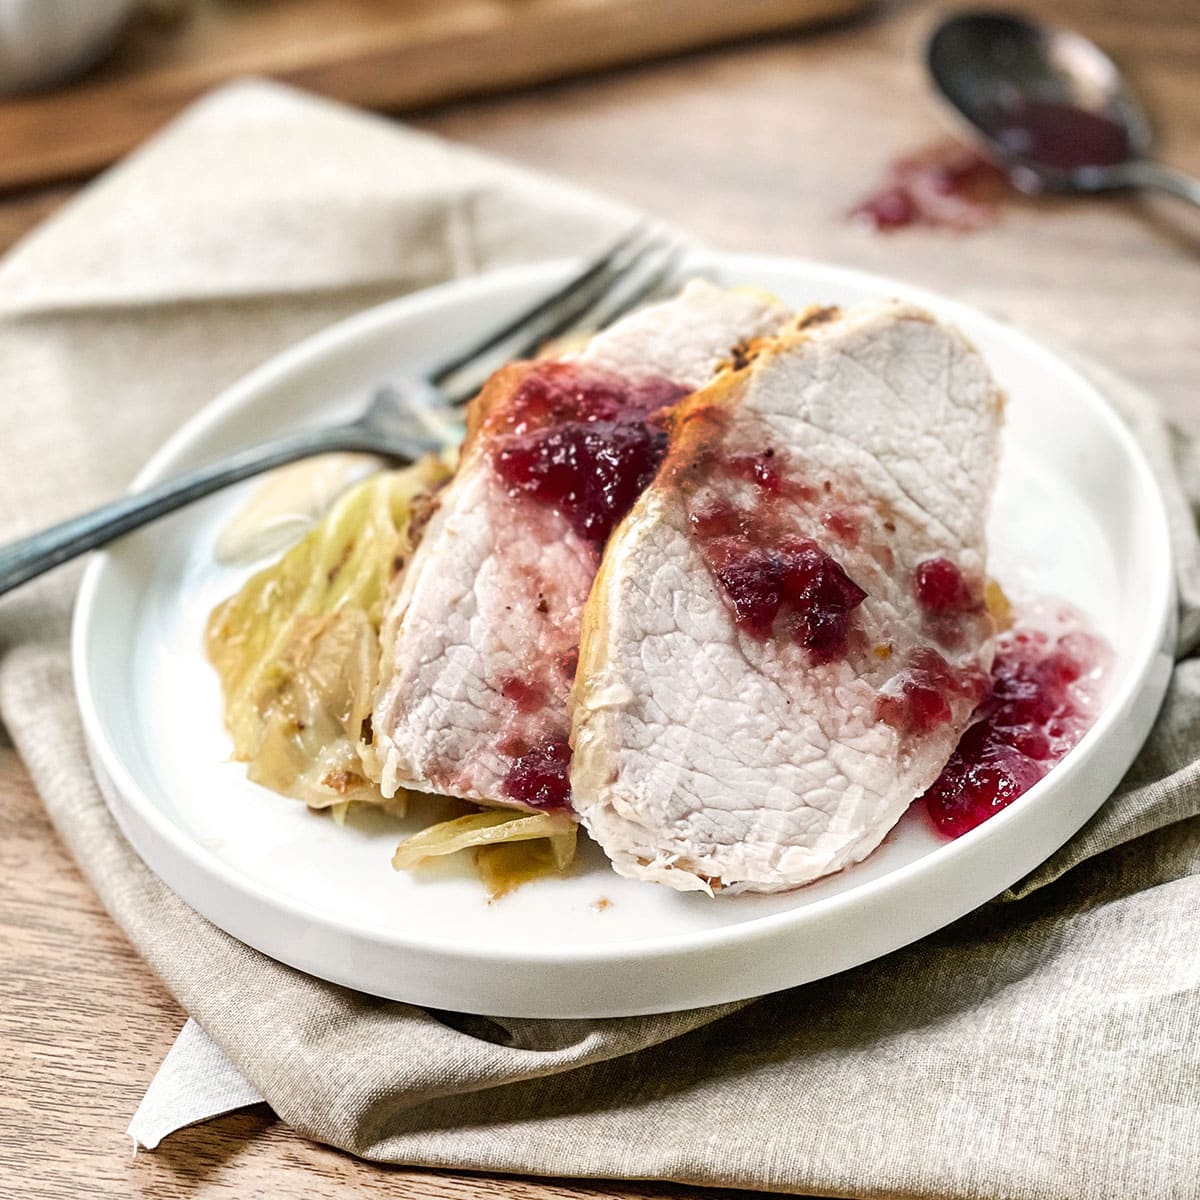 Slices of pork with cranberry sauce on top of cabbage.